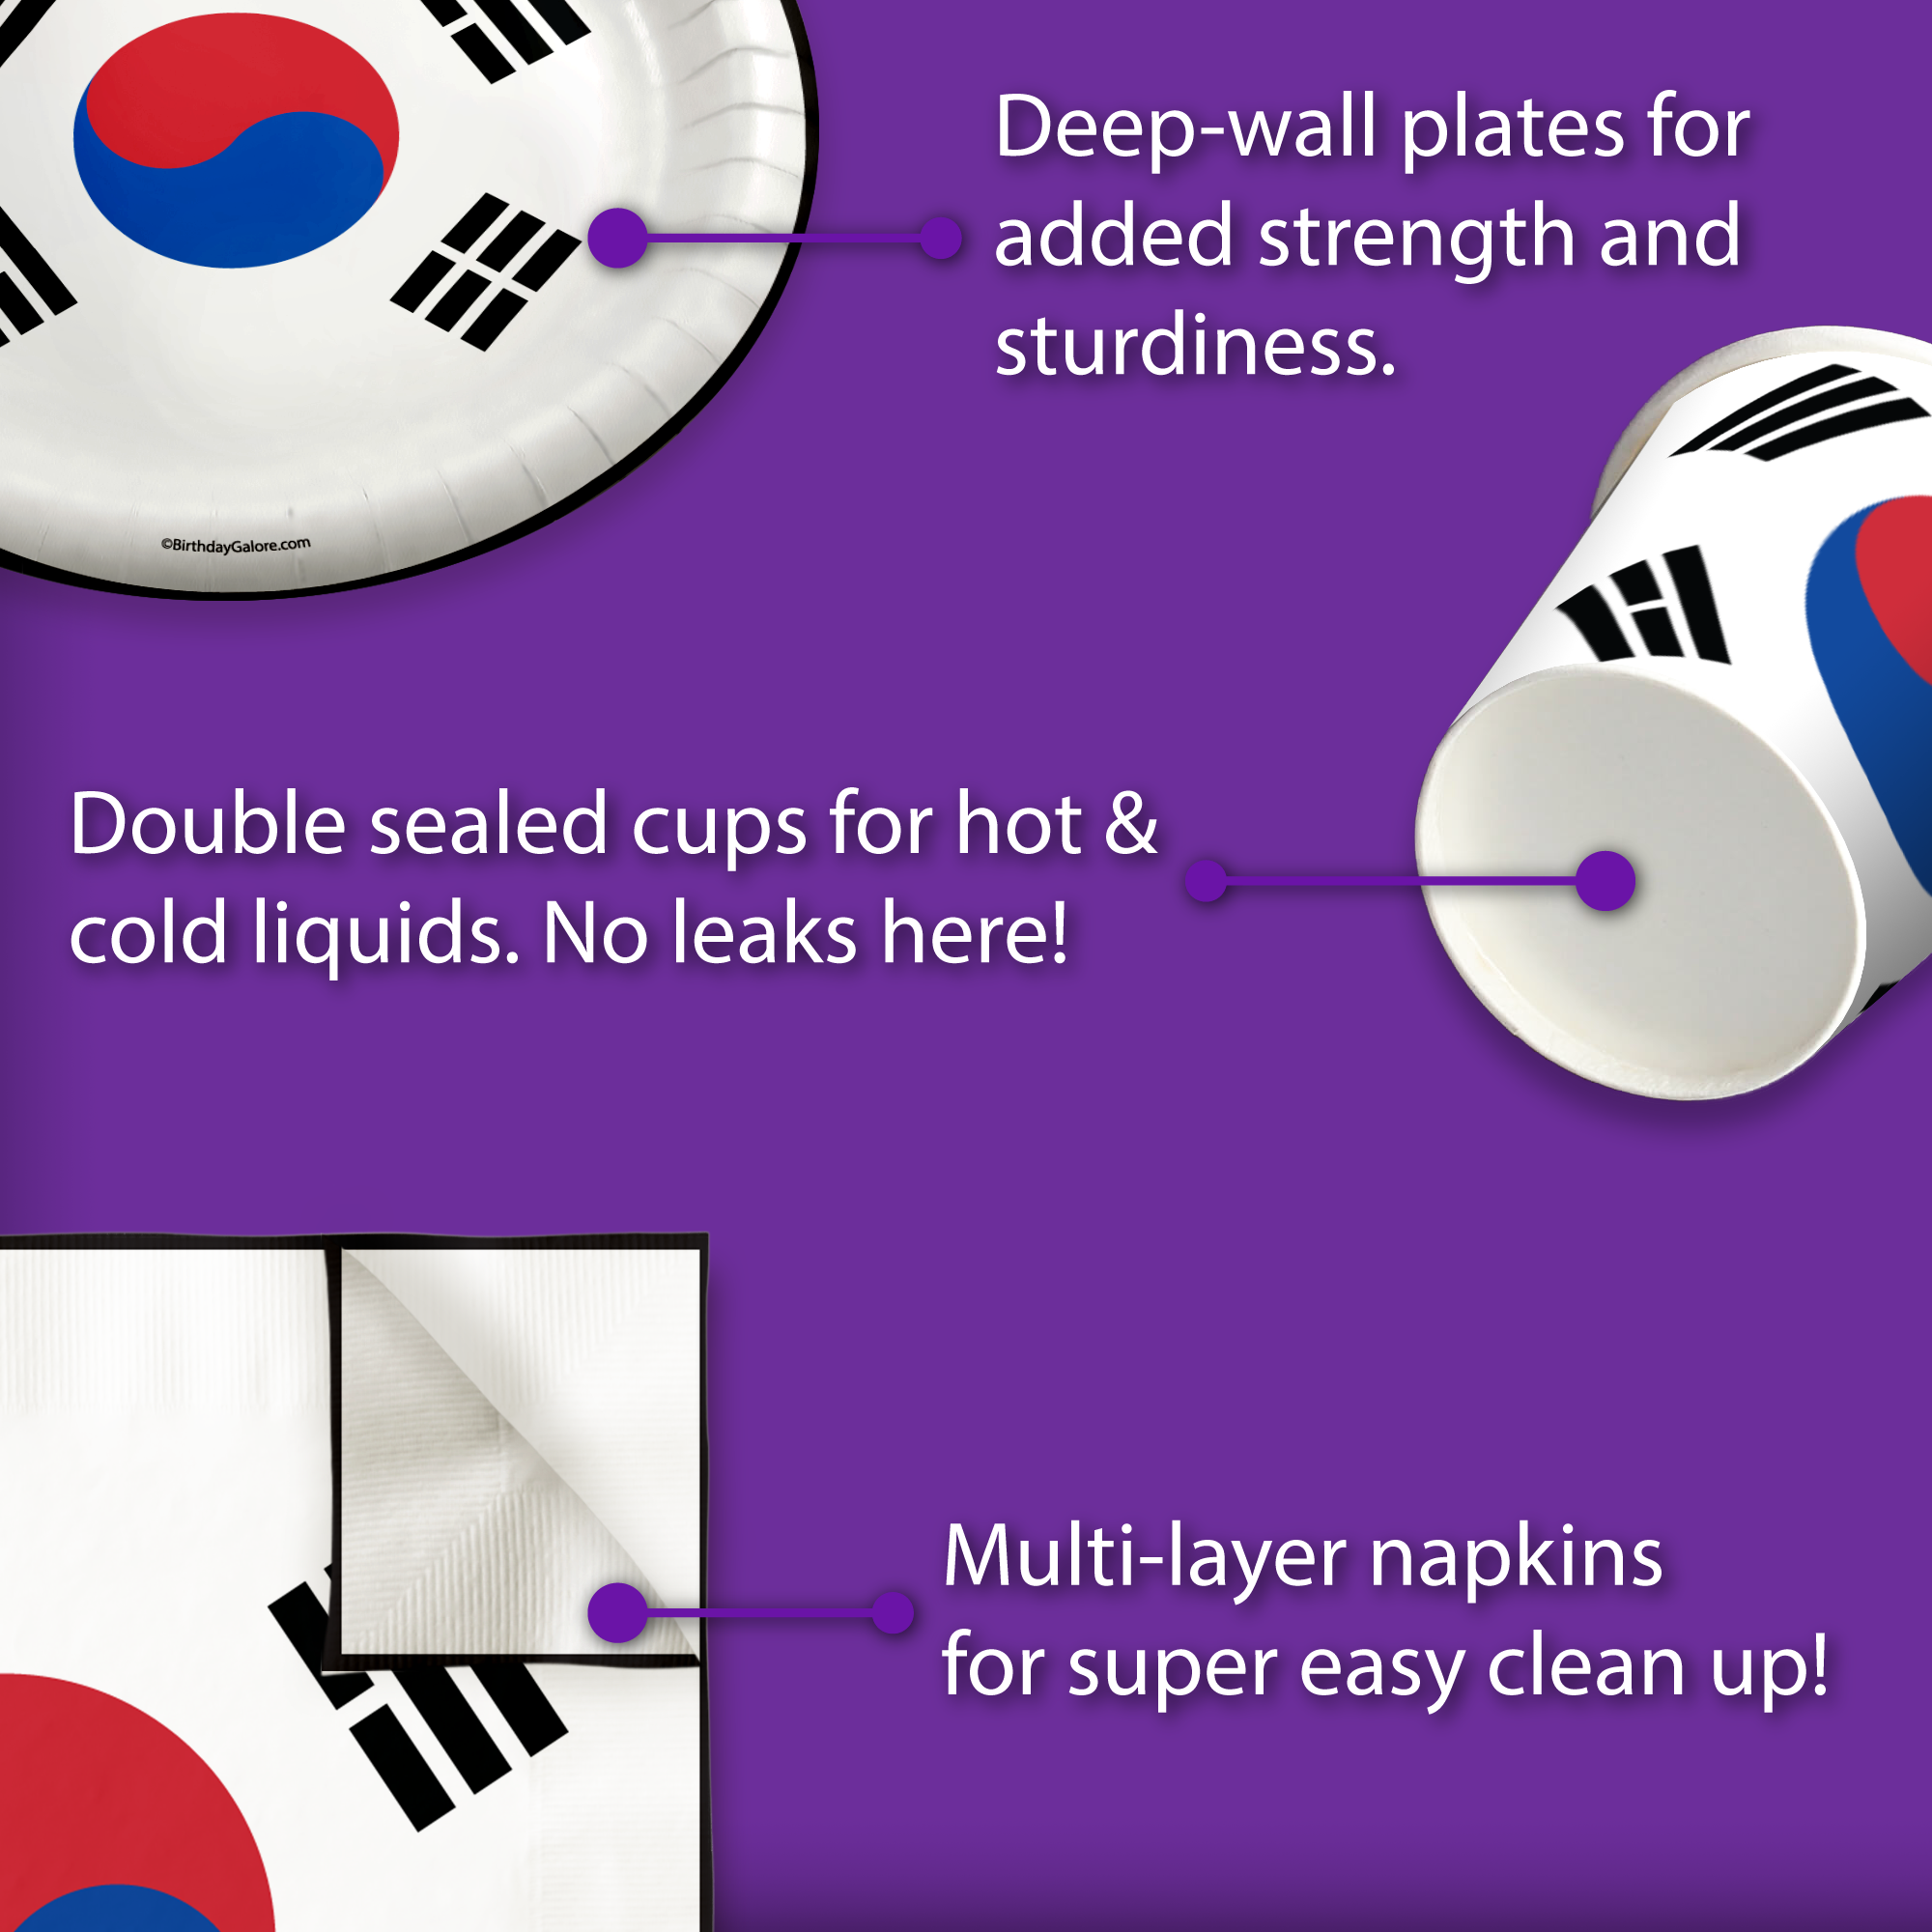 South Korean Flag Birthday Party Tableware Kit For 16 Guests